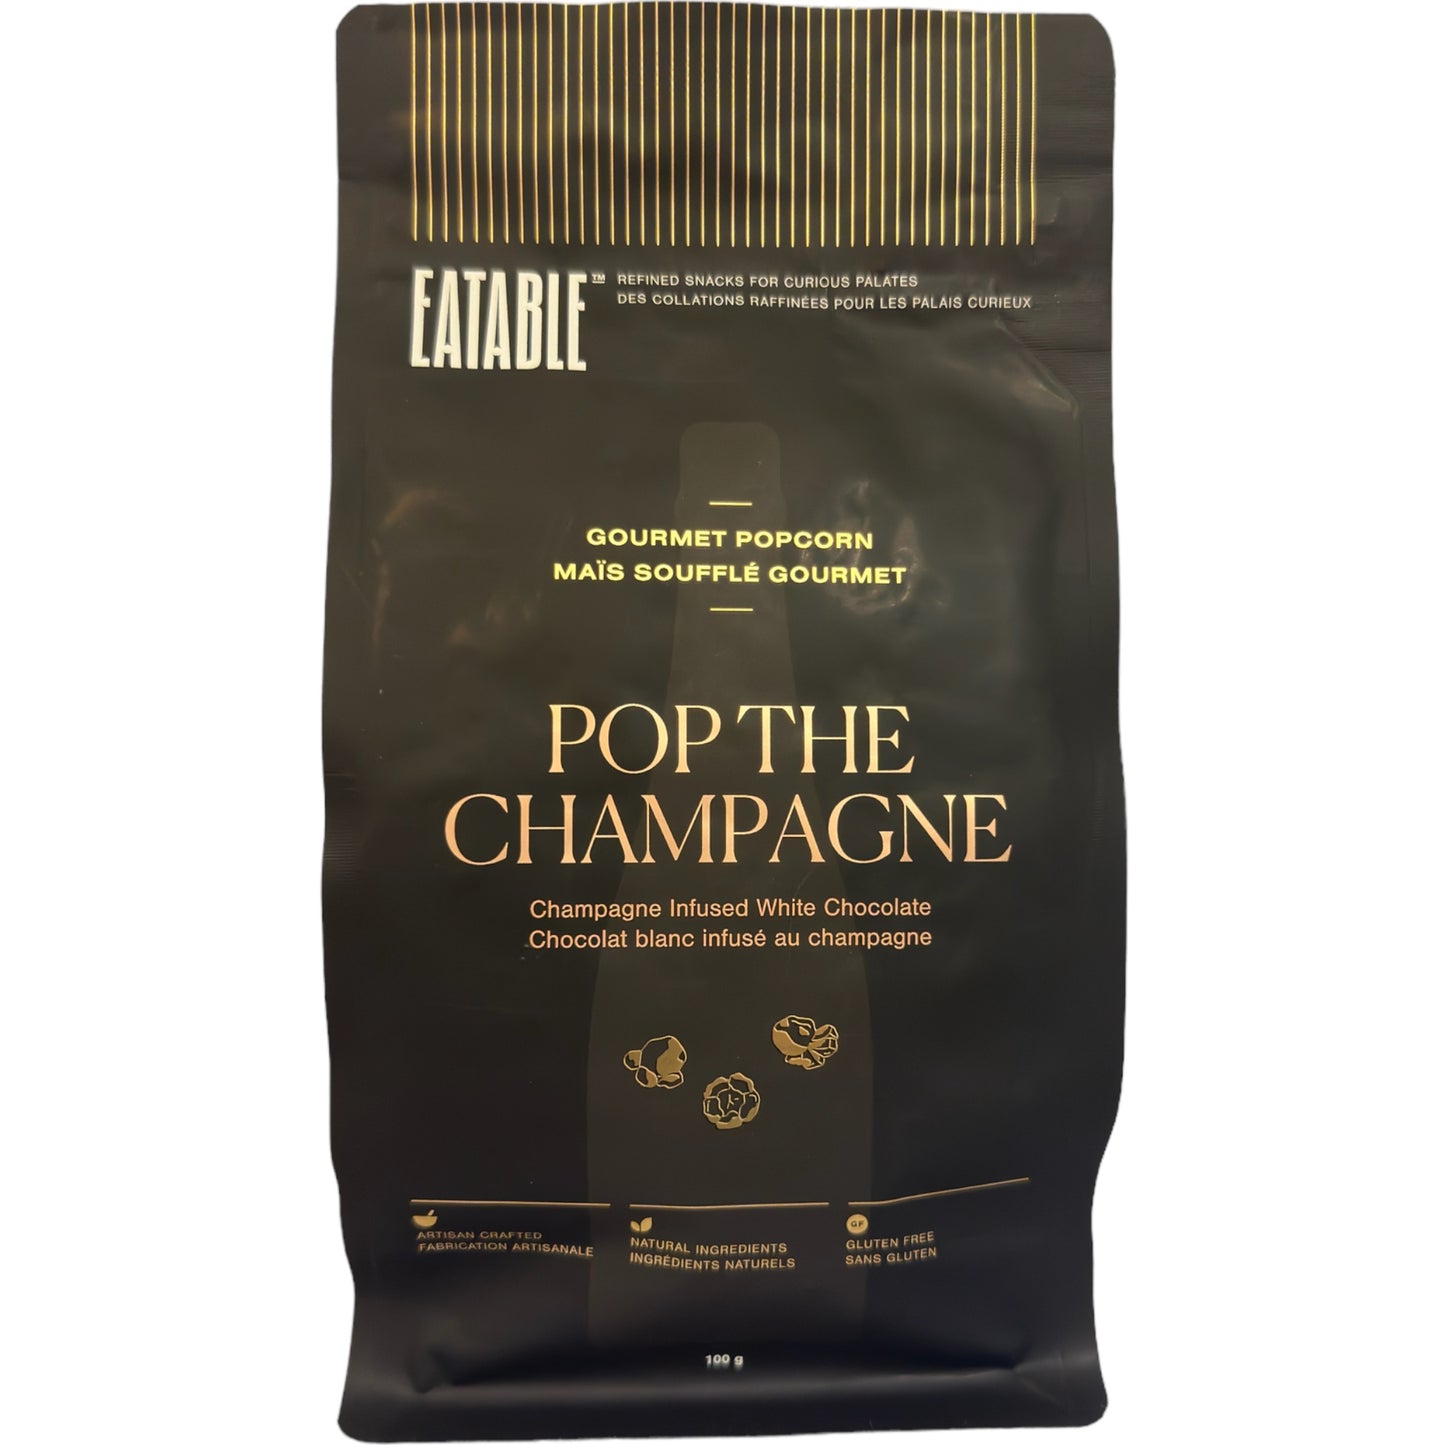 EATABLE POP THE CHAMPAGNE